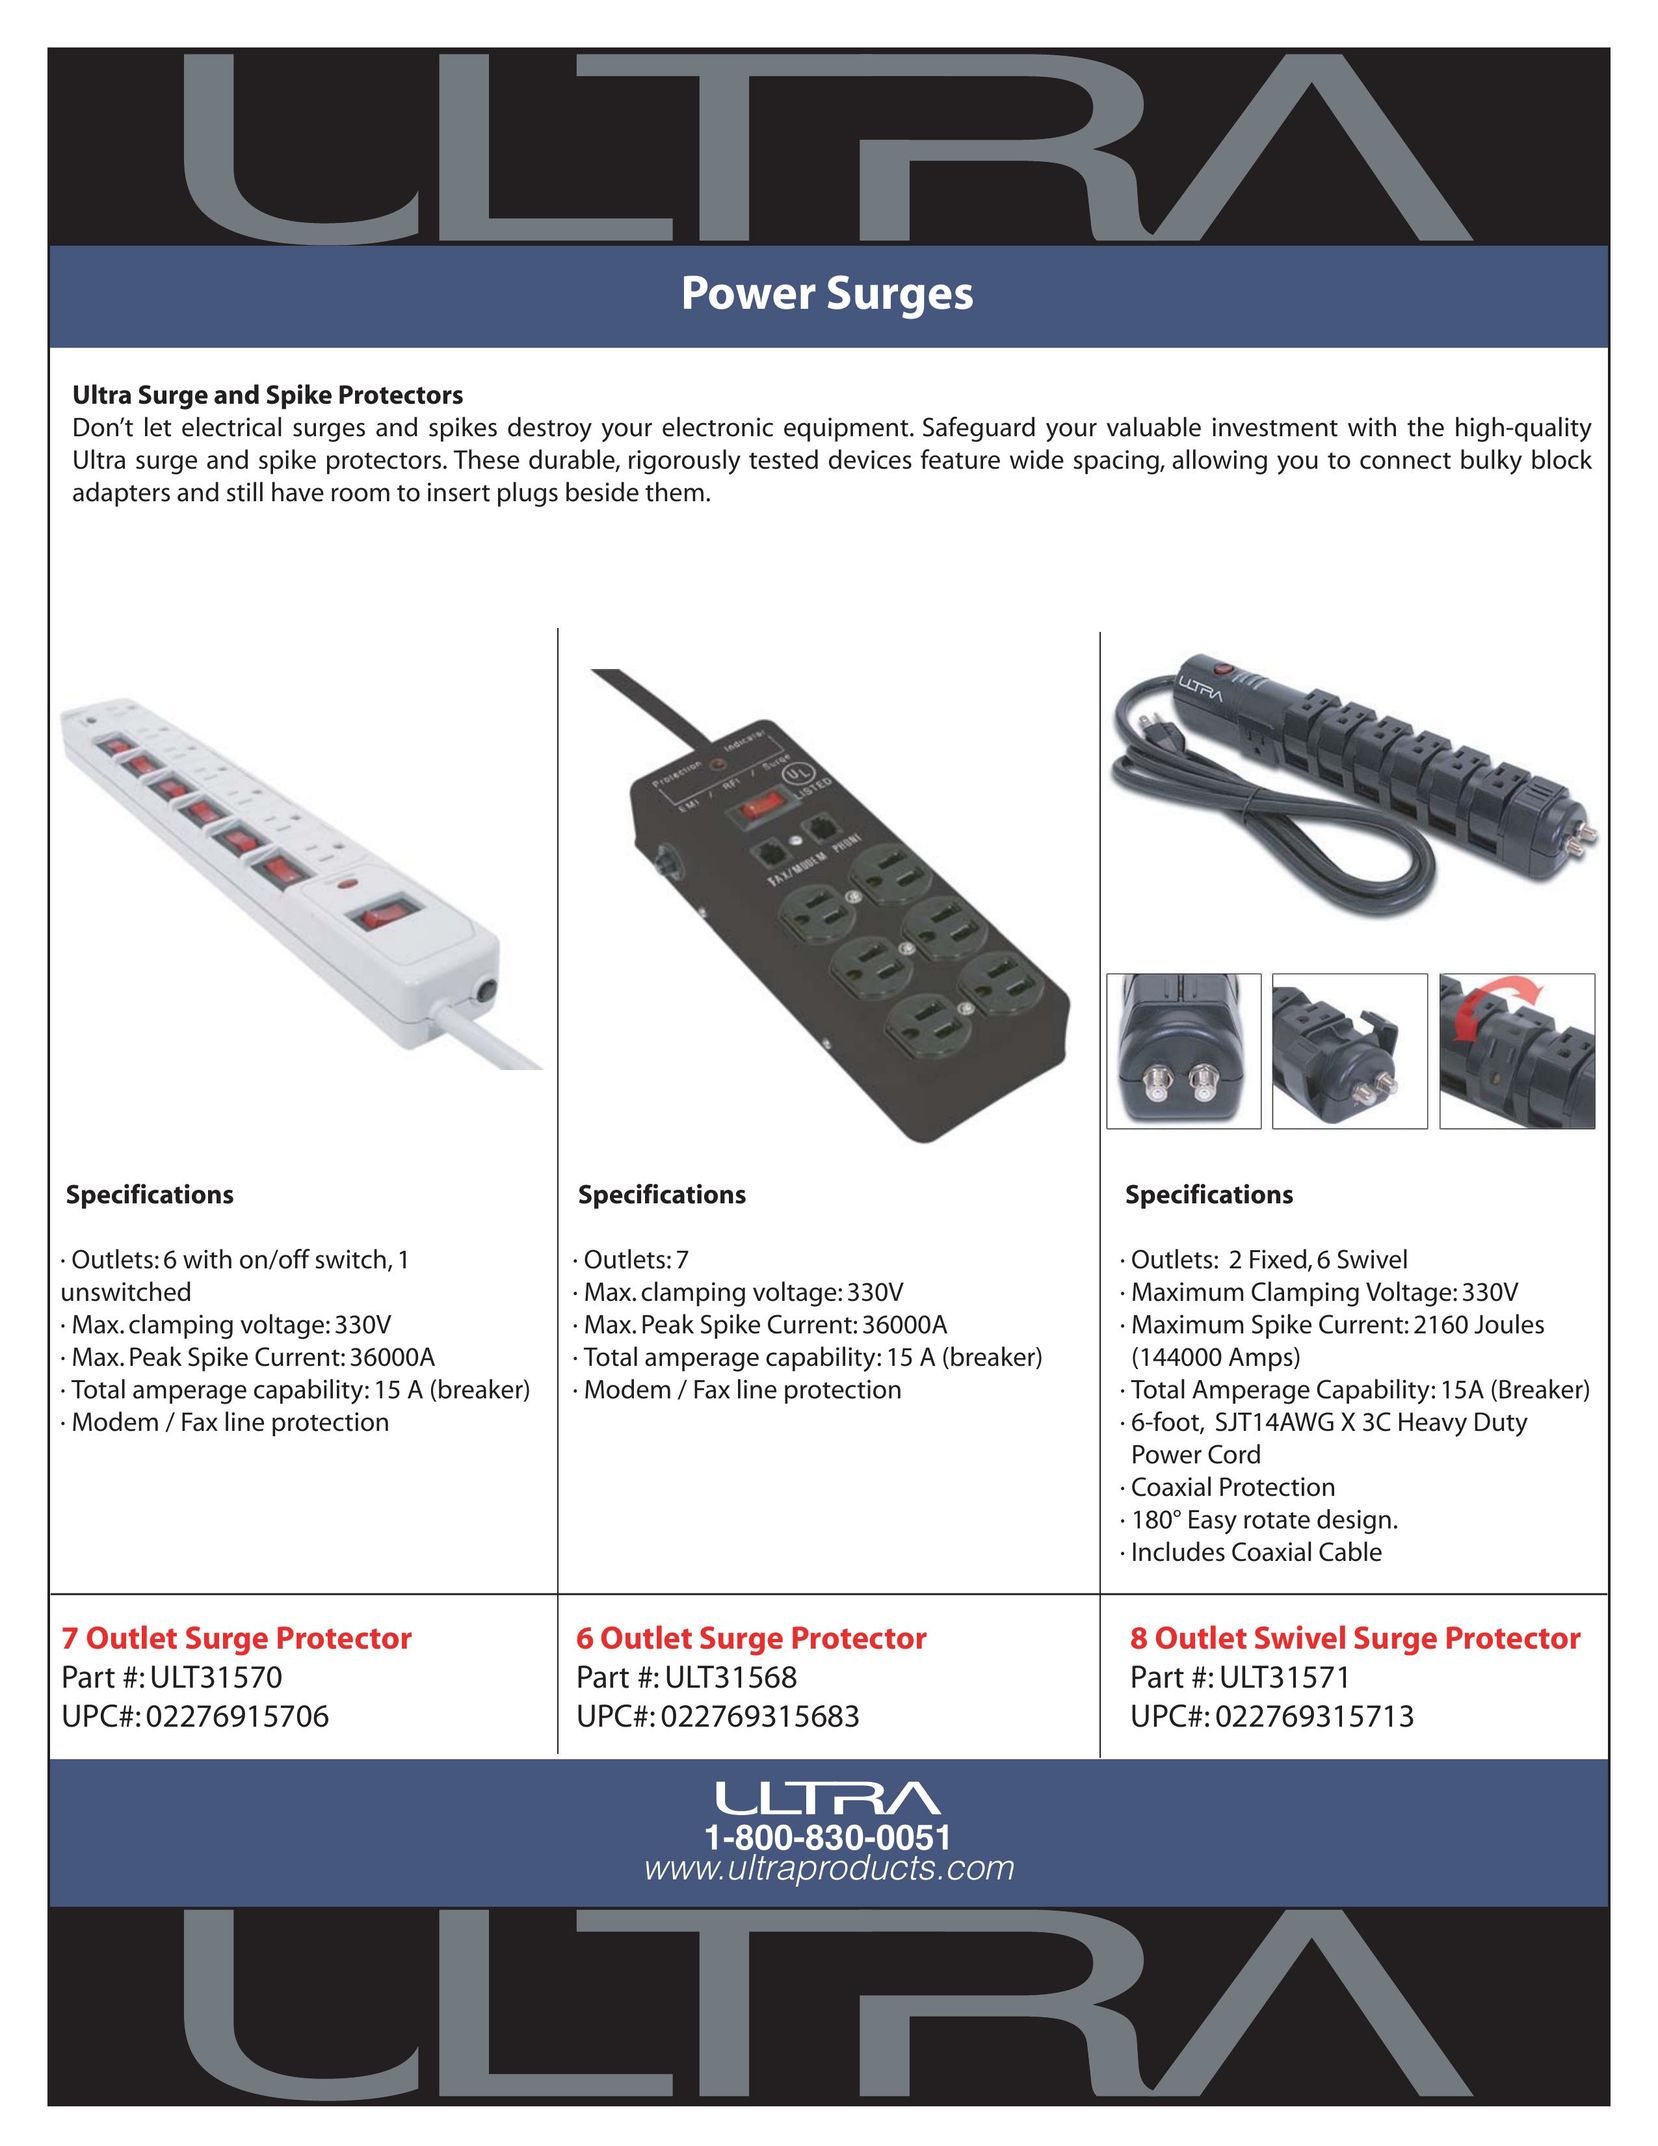 Ultra Products ULT31571 Surge Protector User Manual